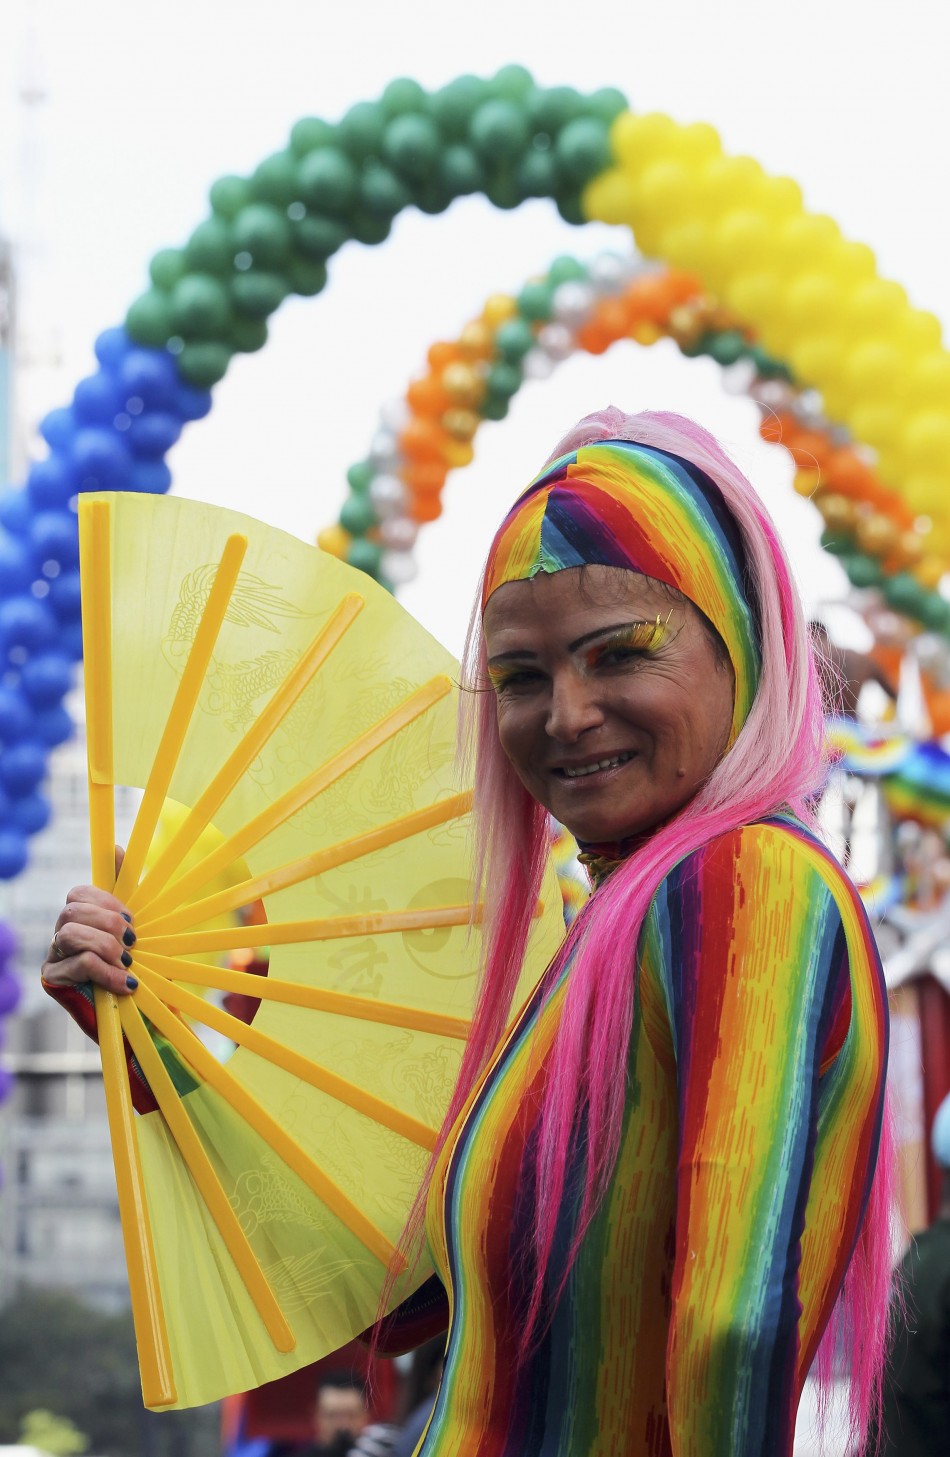 A participant parades during the 16th LGBT pride parade in Sao Paulo, Brazil